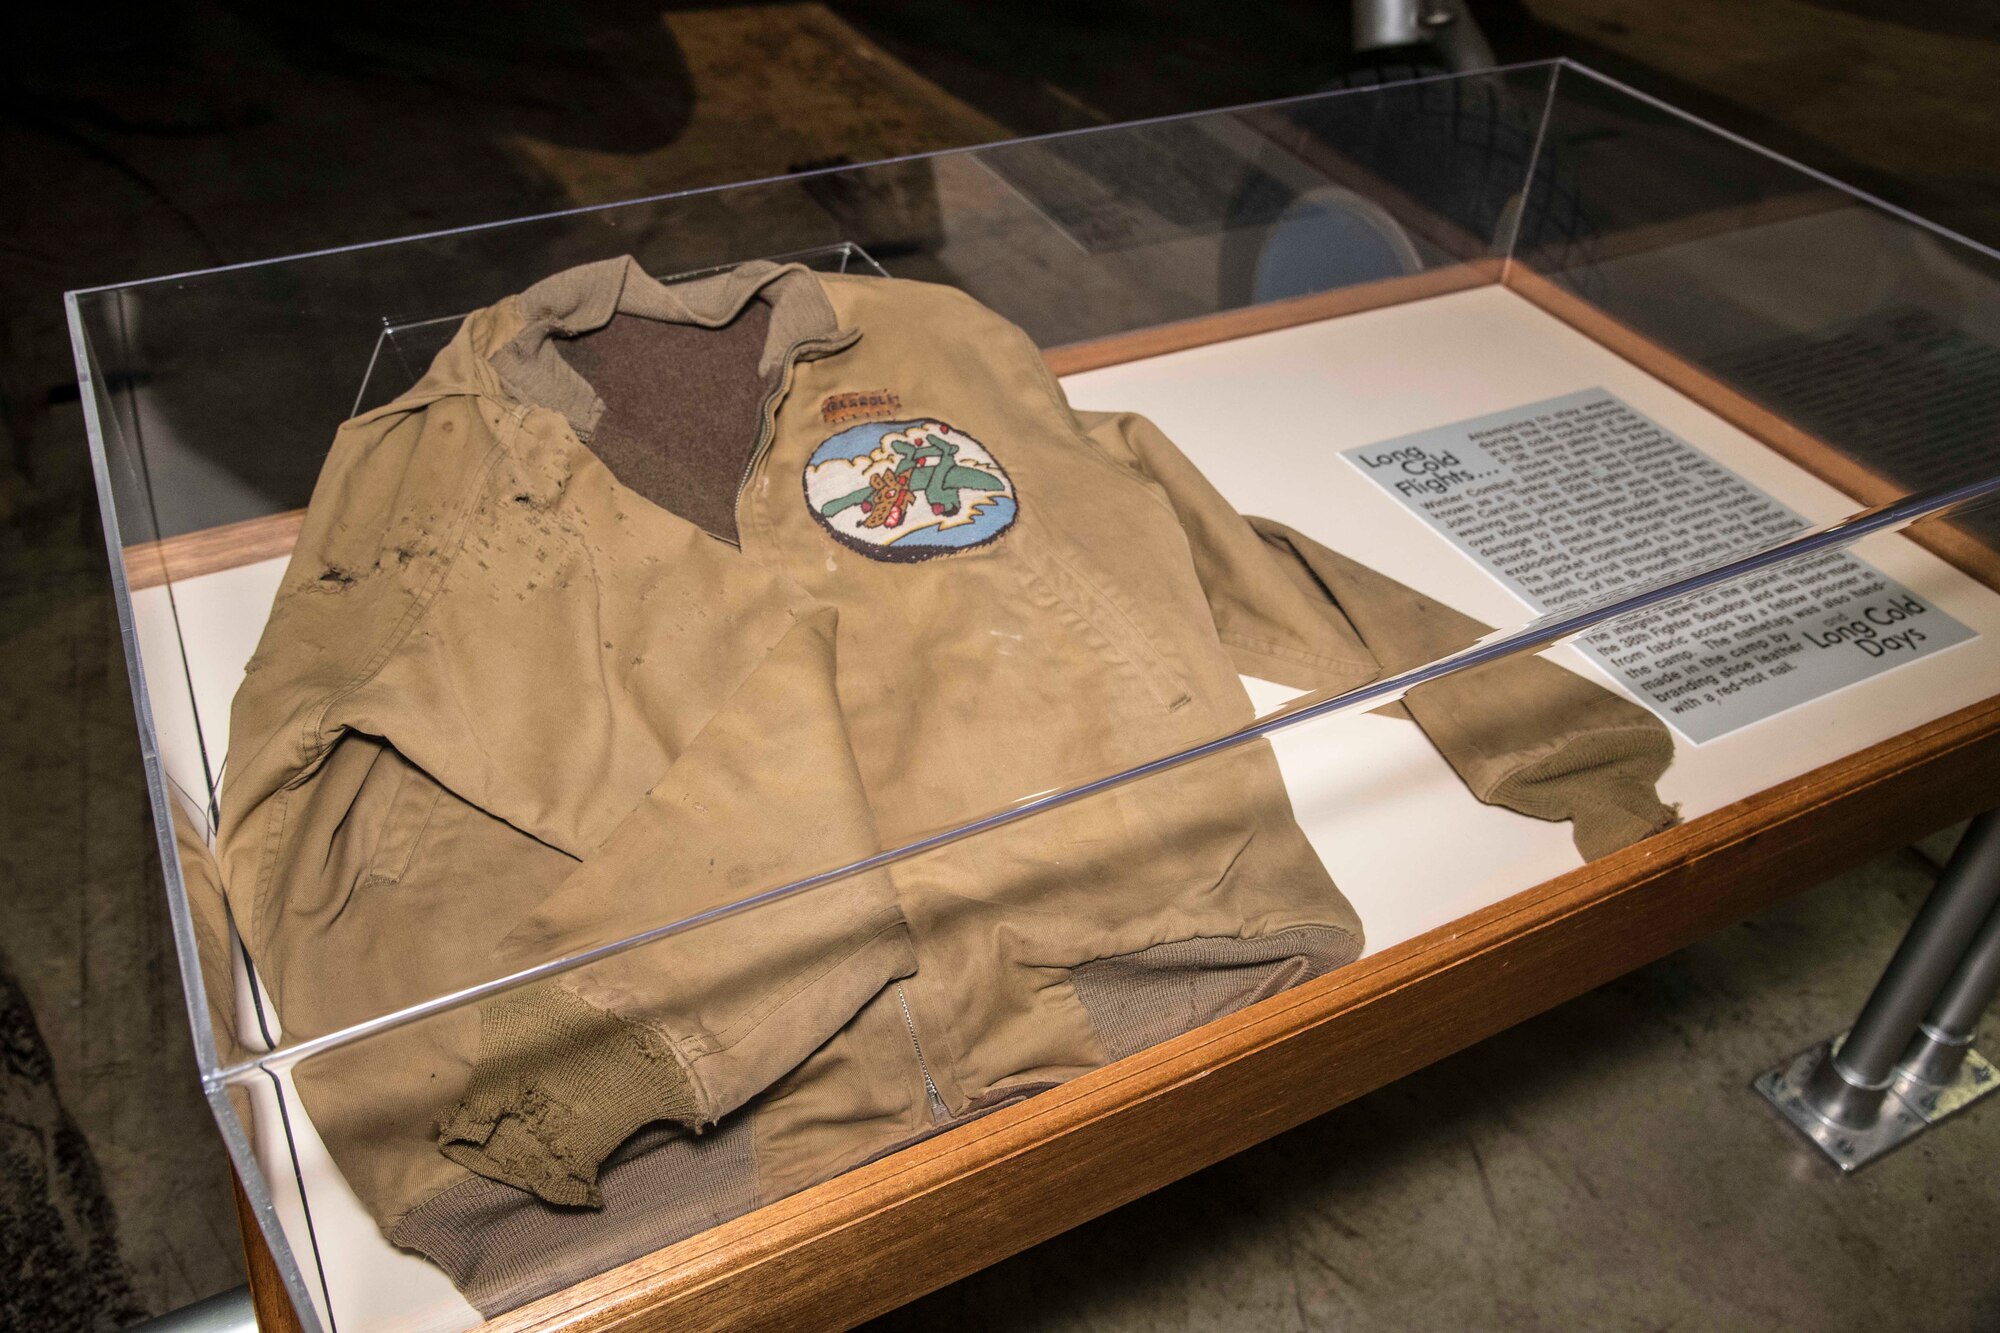 DAYTON, Ohio - 2nd Lt. John Carroll of the 55th Fighter Group was wearing this jacket when he was shot down over Holland on Nov. 23, 1943. This item is on display near the Lockheed P-38L Lightning in the WWII Gallery. (U.S. Air Force photo by Ken LaRock)